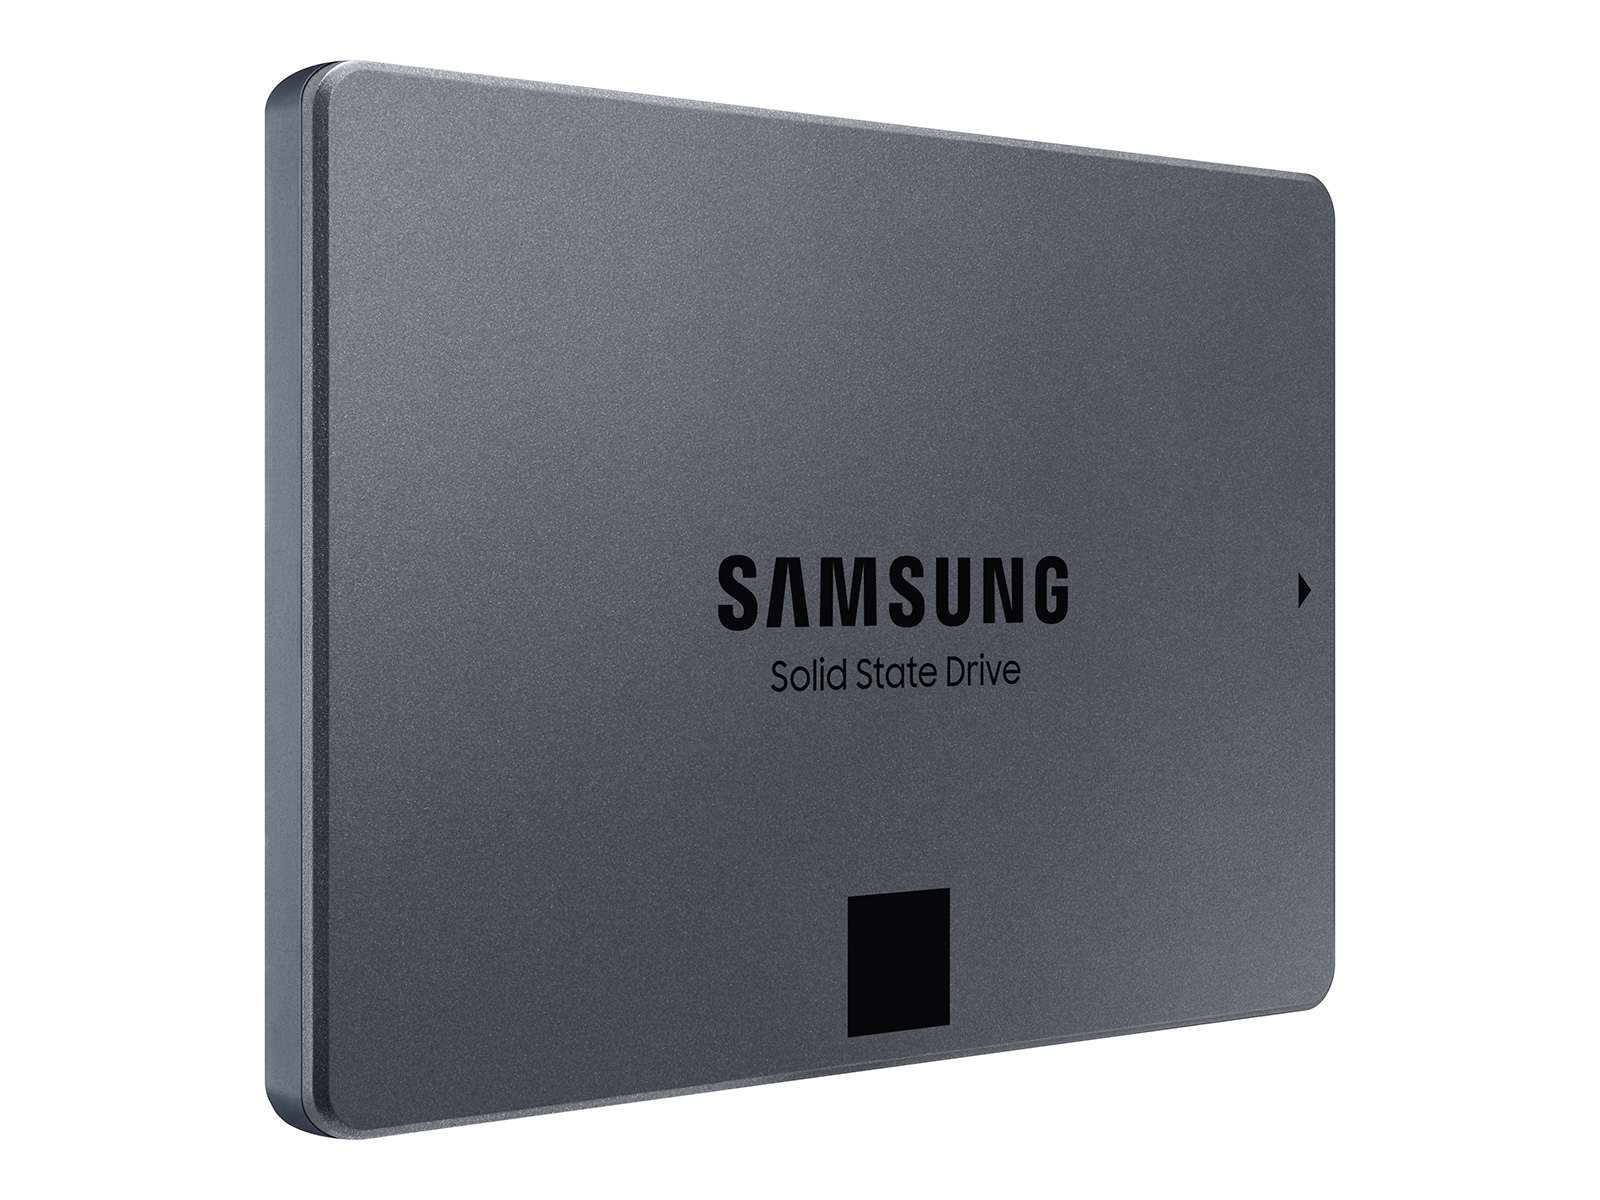 SAMSUNG 870 EVO SATA III SSD 1TB 2.5” Internal Solid State Drive, Upgrade  PC or Laptop Memory and Storage for IT Pros, Creators, Everyday Users